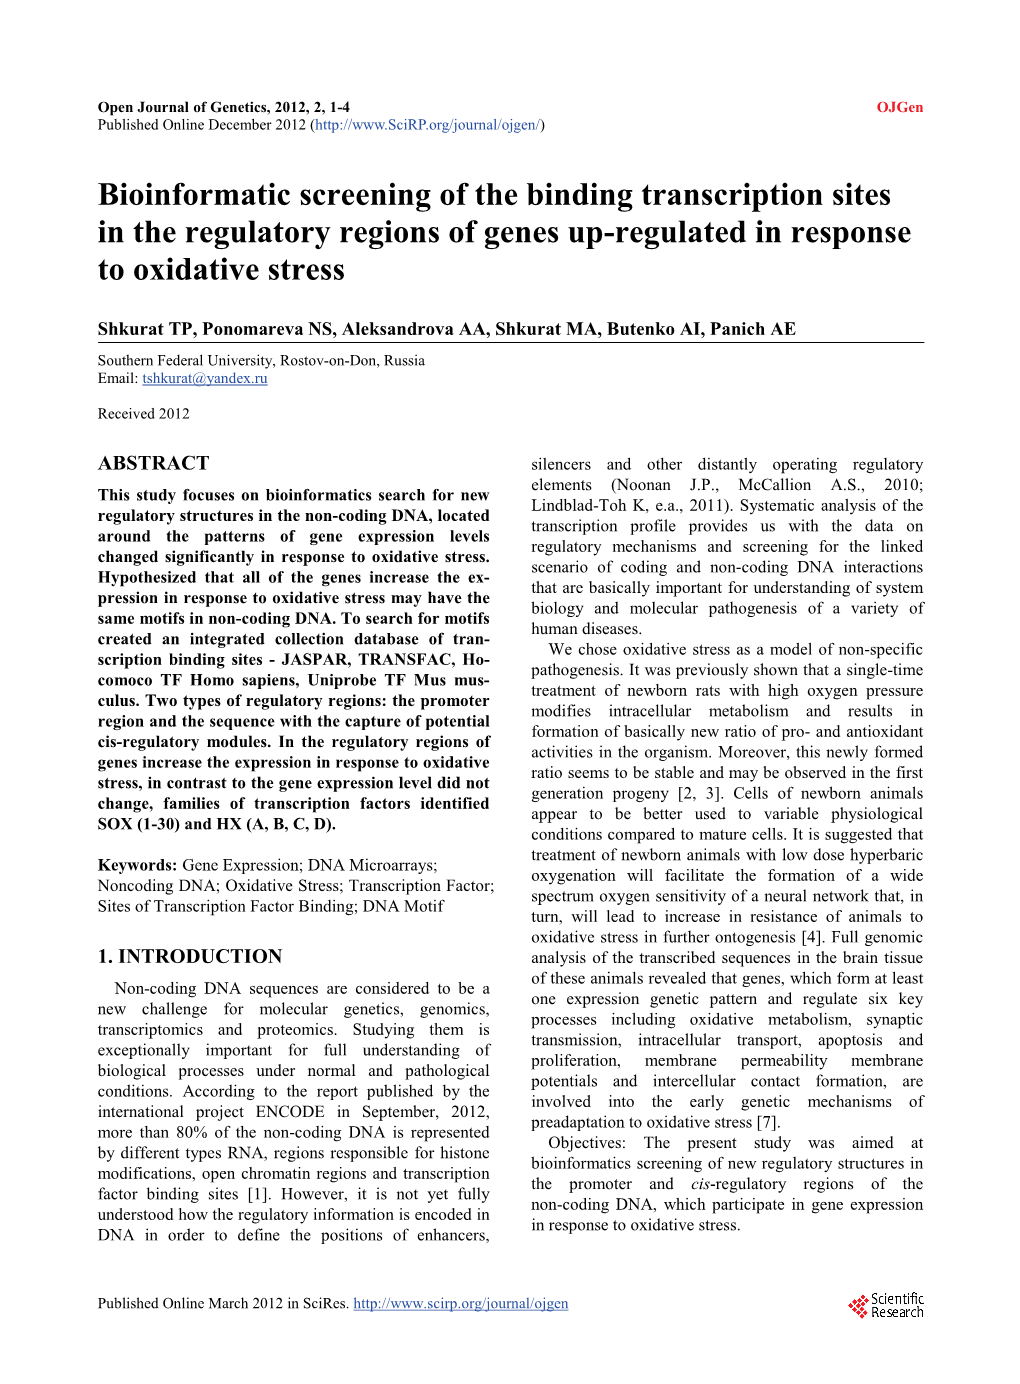 Bioinformatic Screening of the Binding Transcription Sites in the Regulatory Regions of Genes Up-Regulated in Response to Oxidative Stress